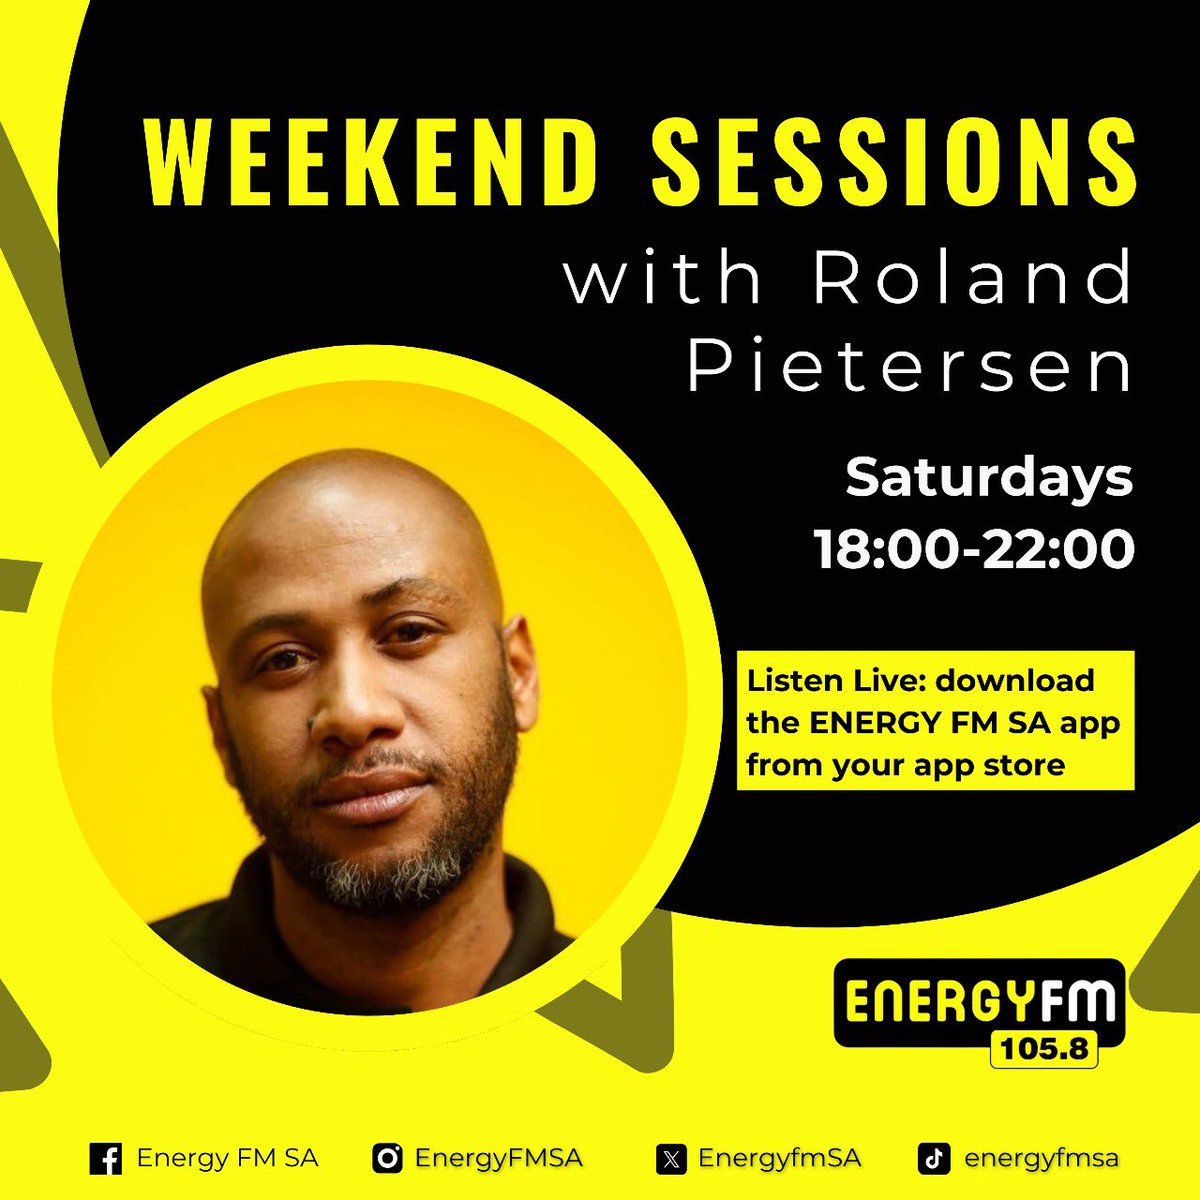 Tune in for a delightful blend of music, stories, and good vibes as Roland Pietersen embarks on this weekend journey together with you on the #WeekendSessions .